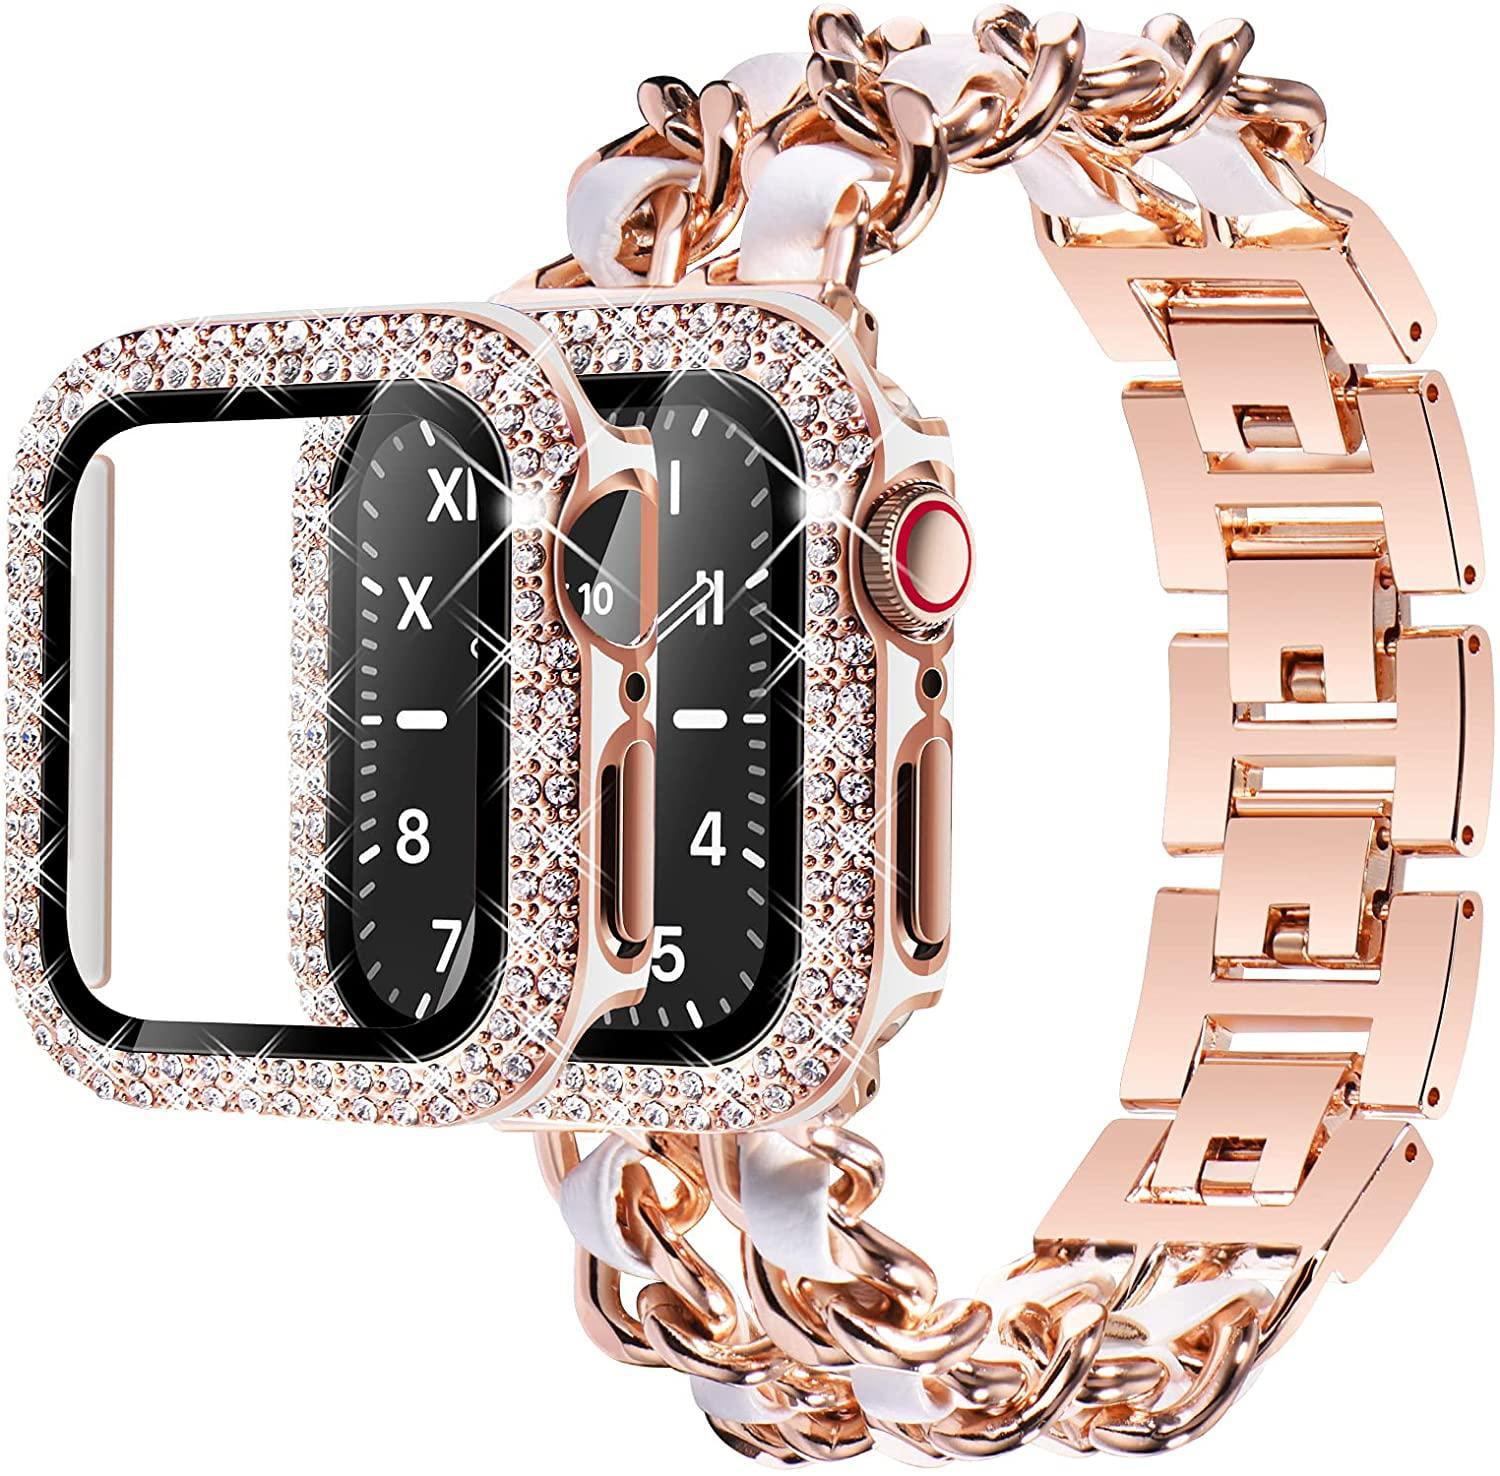 8 Series Watch Apple 44mm for Bling Metal 45mm and Link 7 for YuiYuKa Bumper Hard Case Band Stainless Cover Interwoven iWatch Chain 42mm with Metal Strap 41mm 40mm Leather 38mm Steel